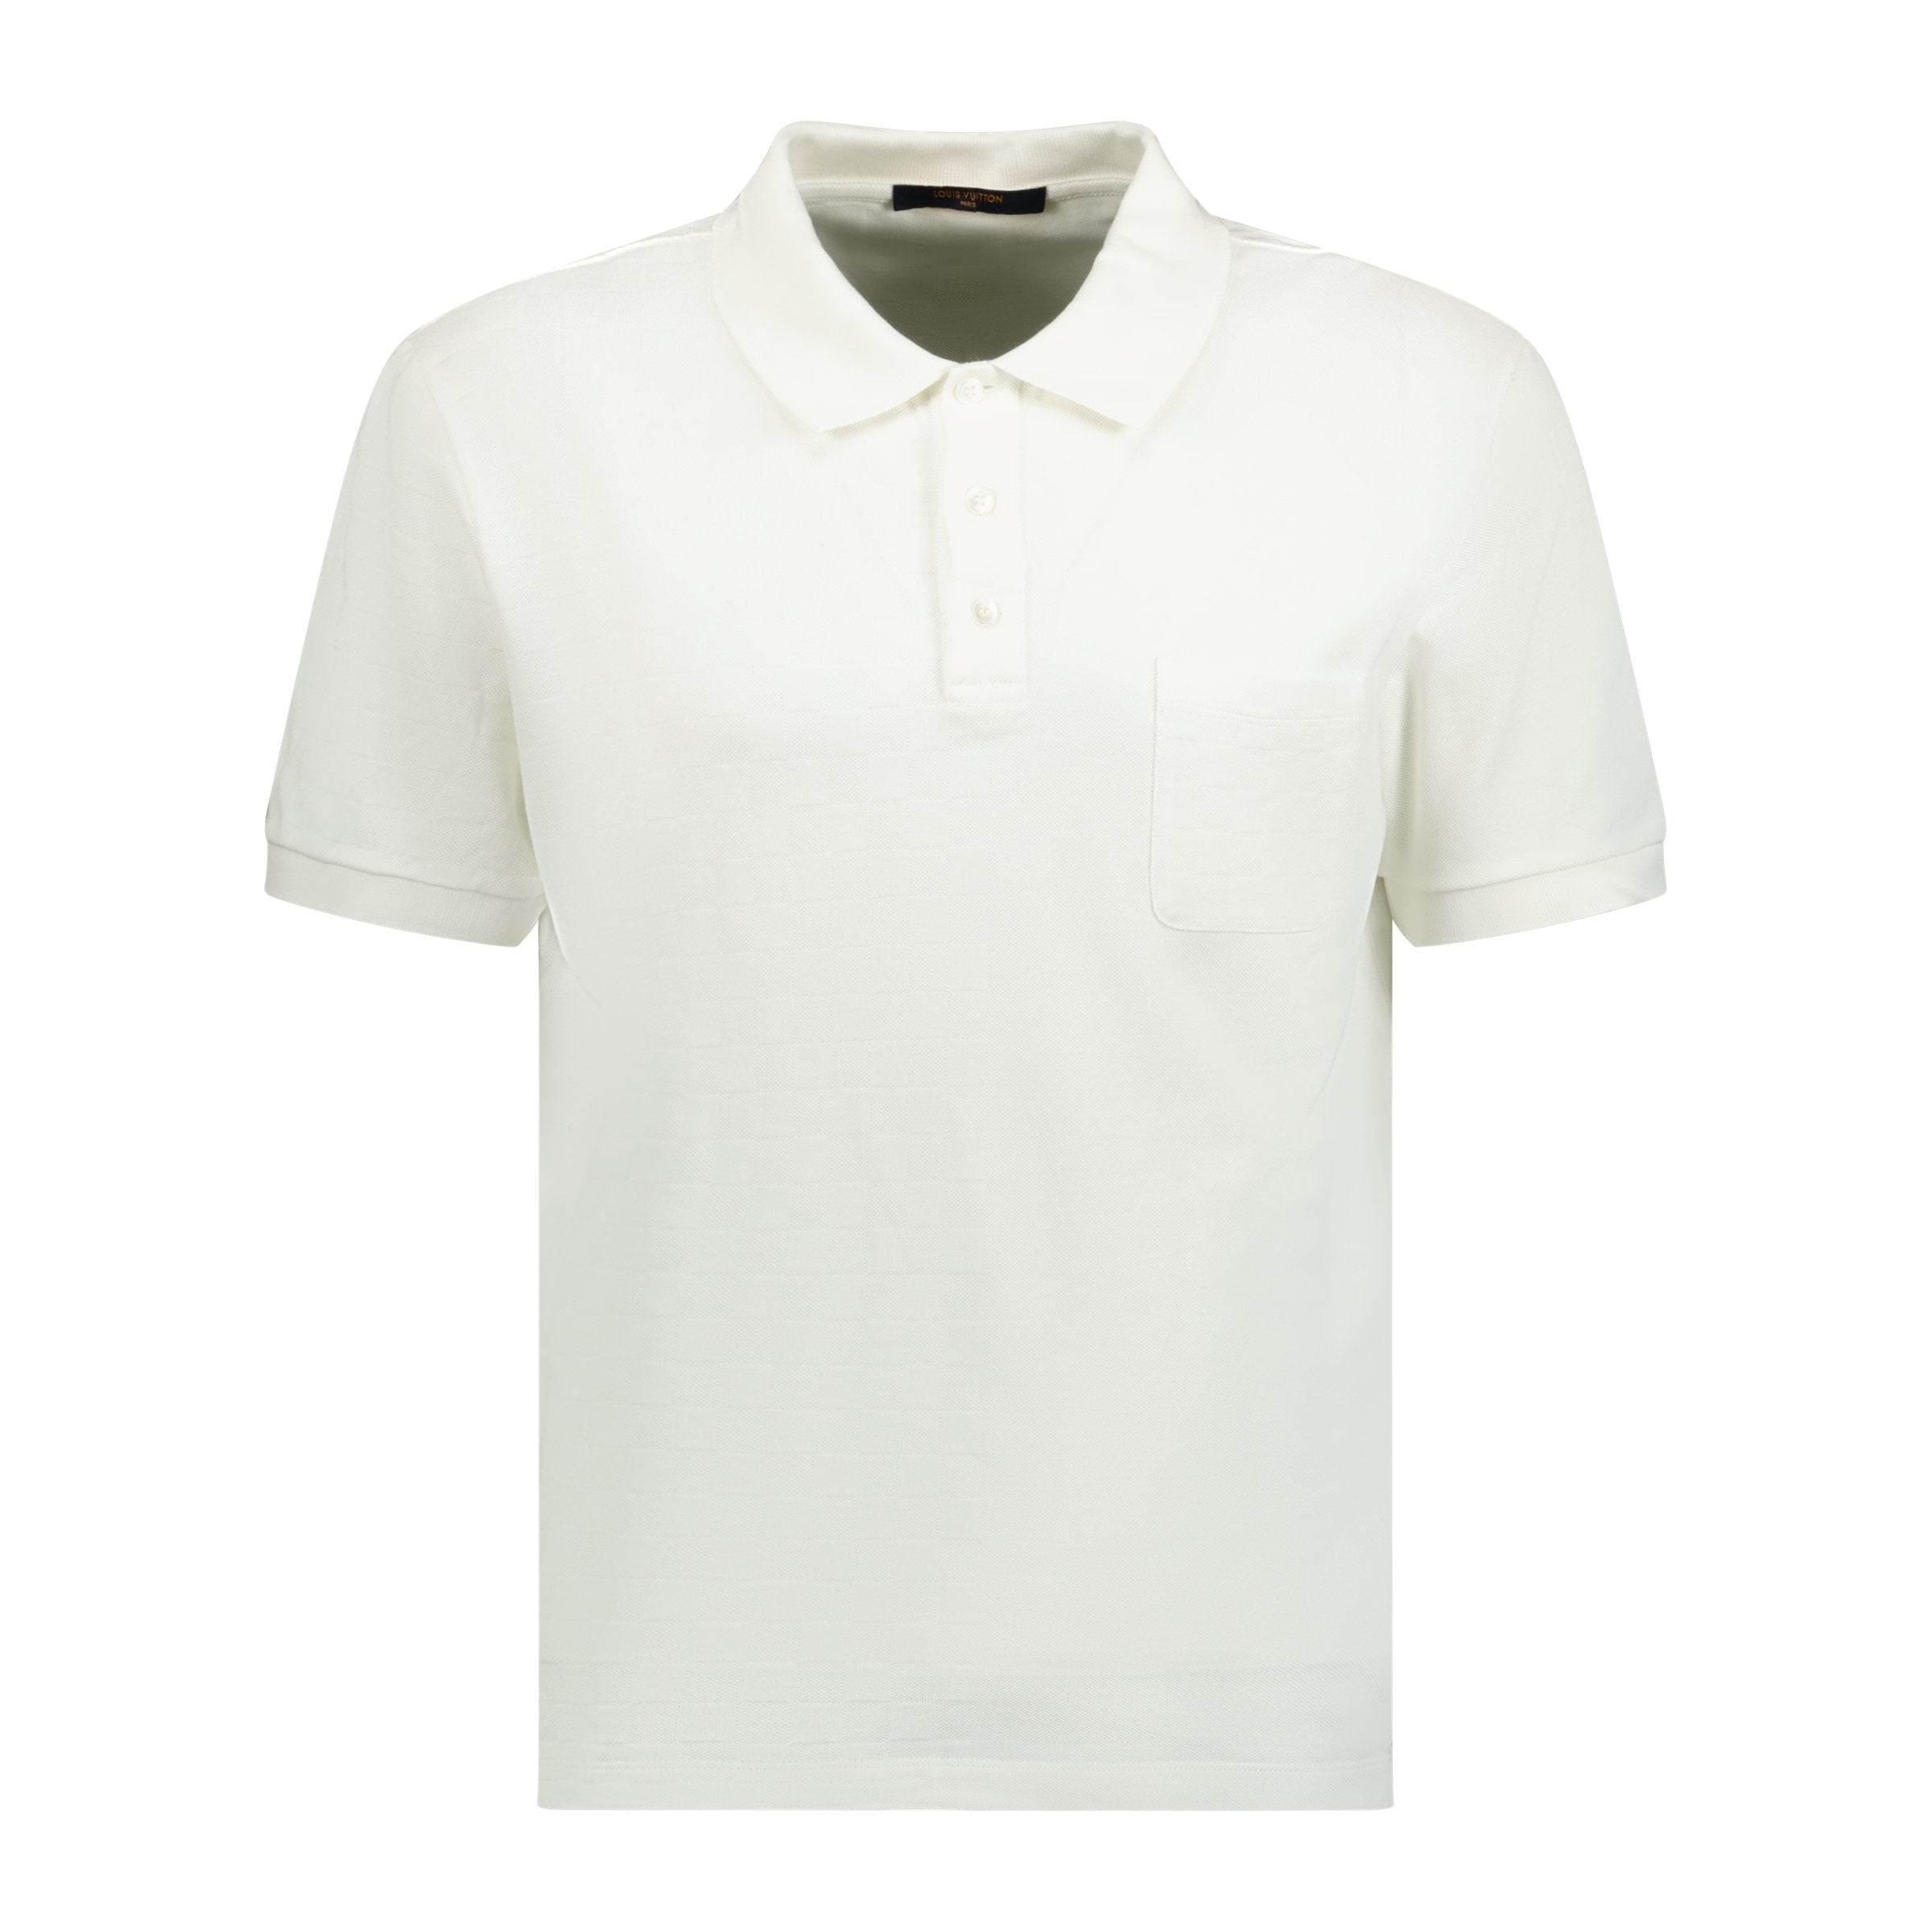 LOUIS VUITTON DAMIER POLO WHITE  affluentarchives - Used Designer Clothing  Outlet Sale Under RRP